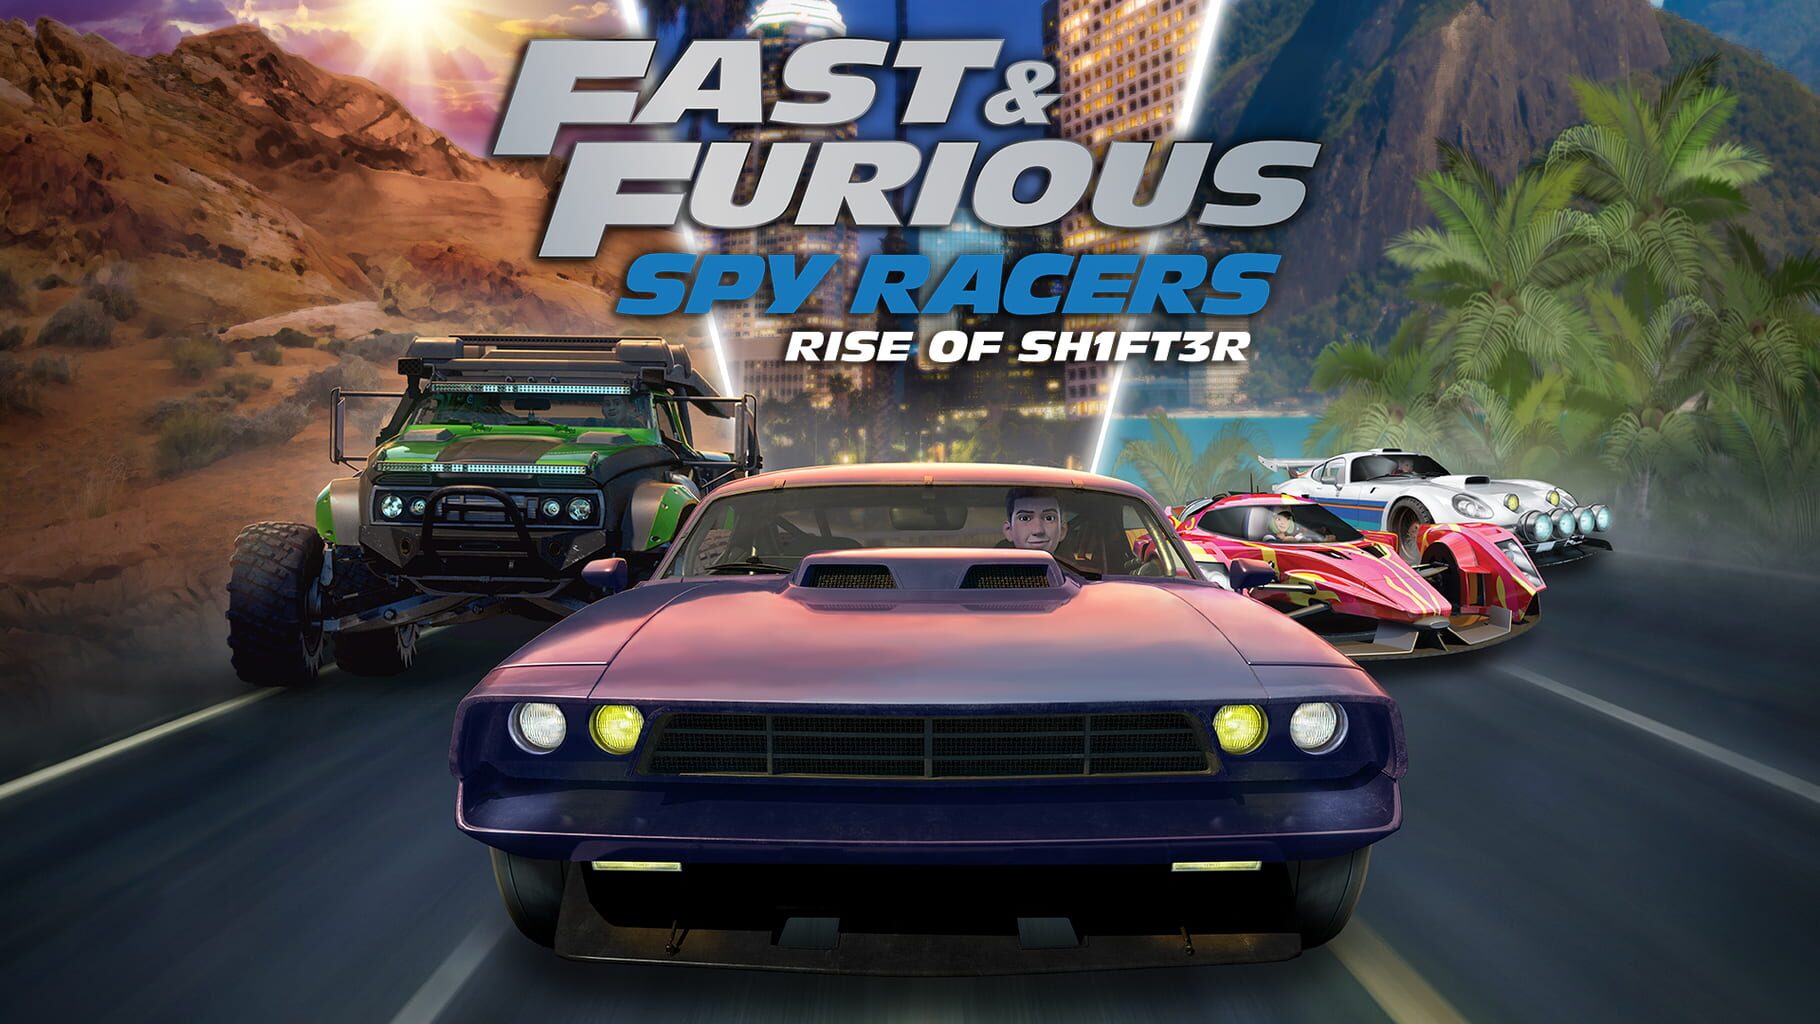 Fast & Furious: Spy Racers Rise of Sh1ft3r artwork